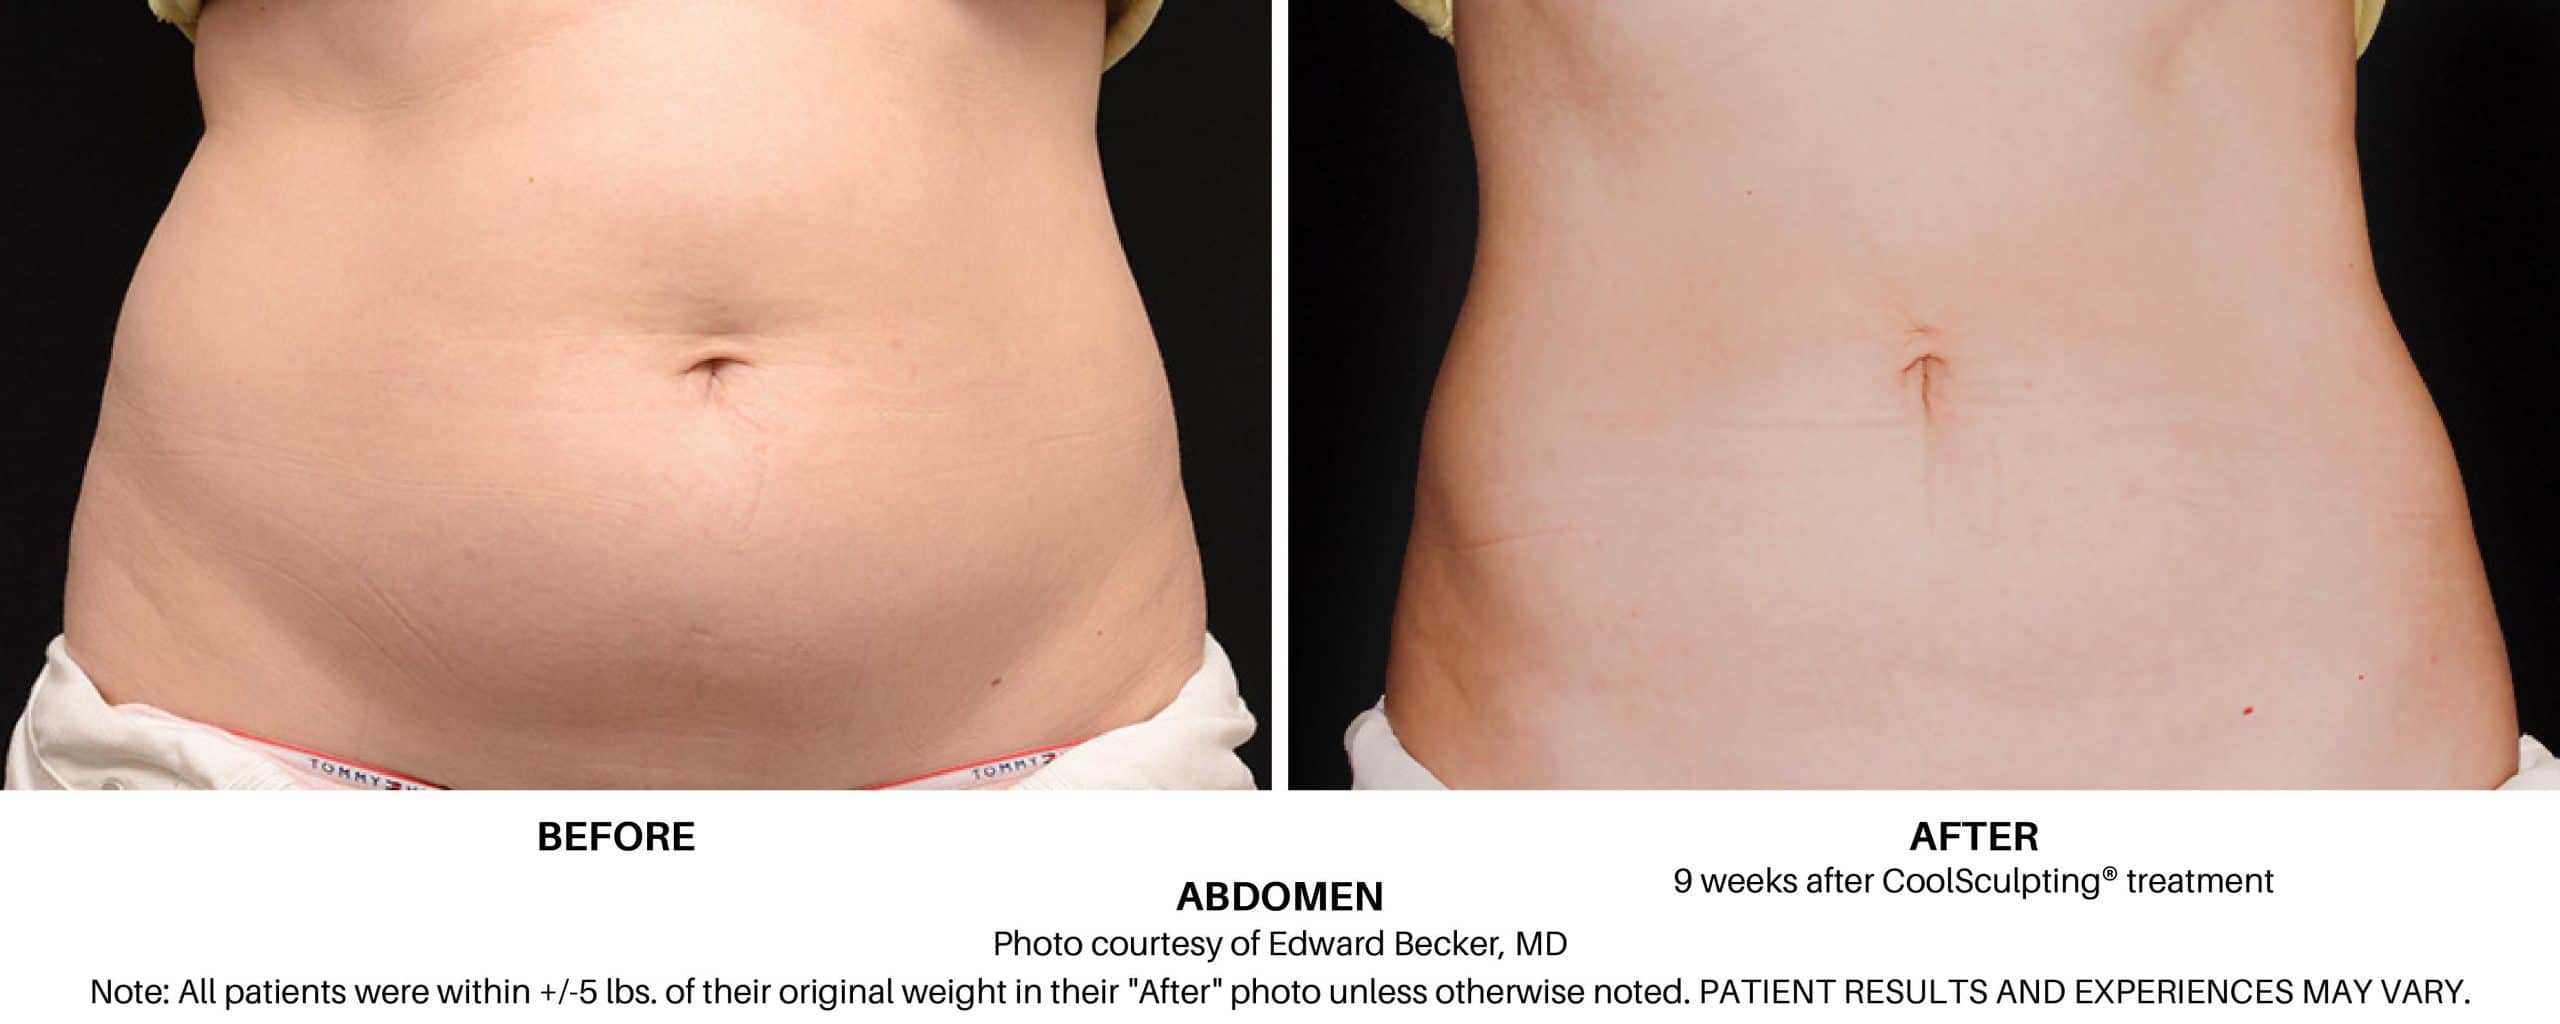 Cryolipolysis Machine for Fat Reduction — Skin Science Solutions